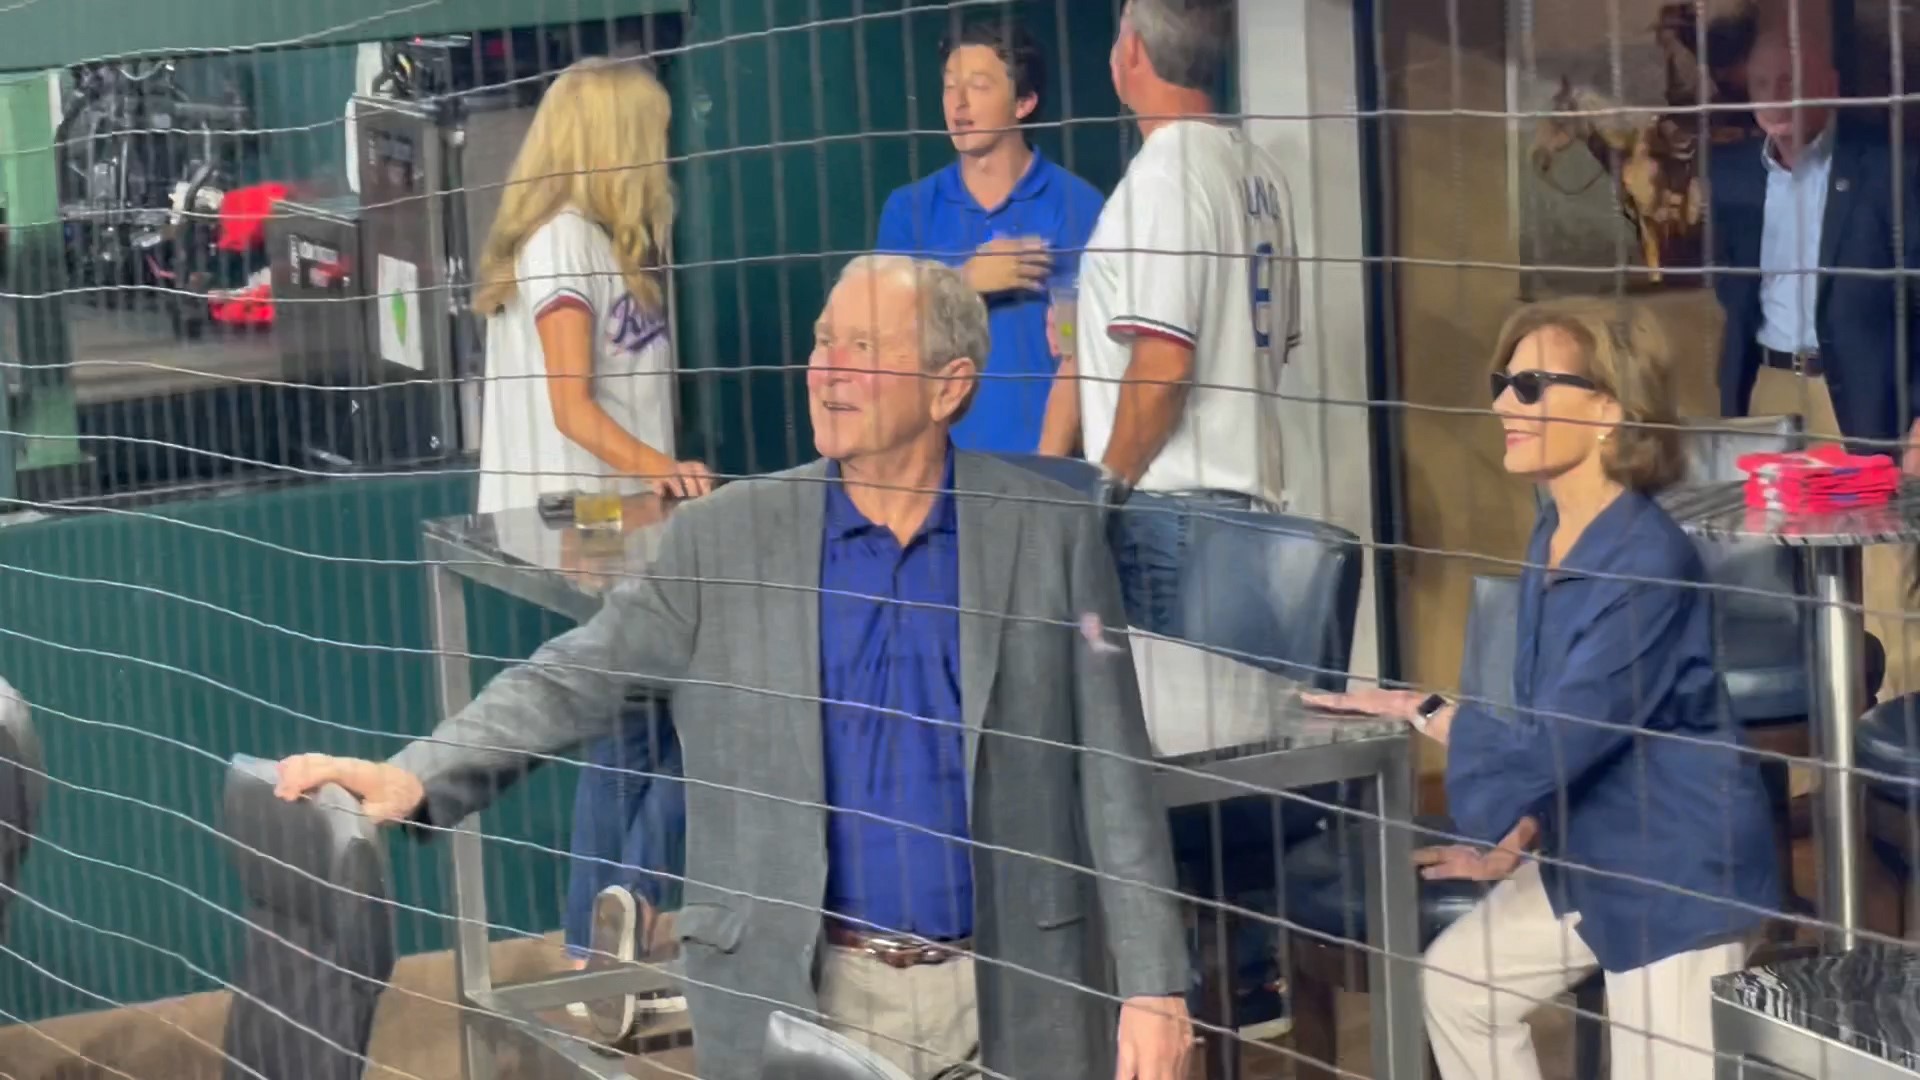 Former President George W. Bush and wife Laura were at the Rangers World Series game Friday night in Arlington.